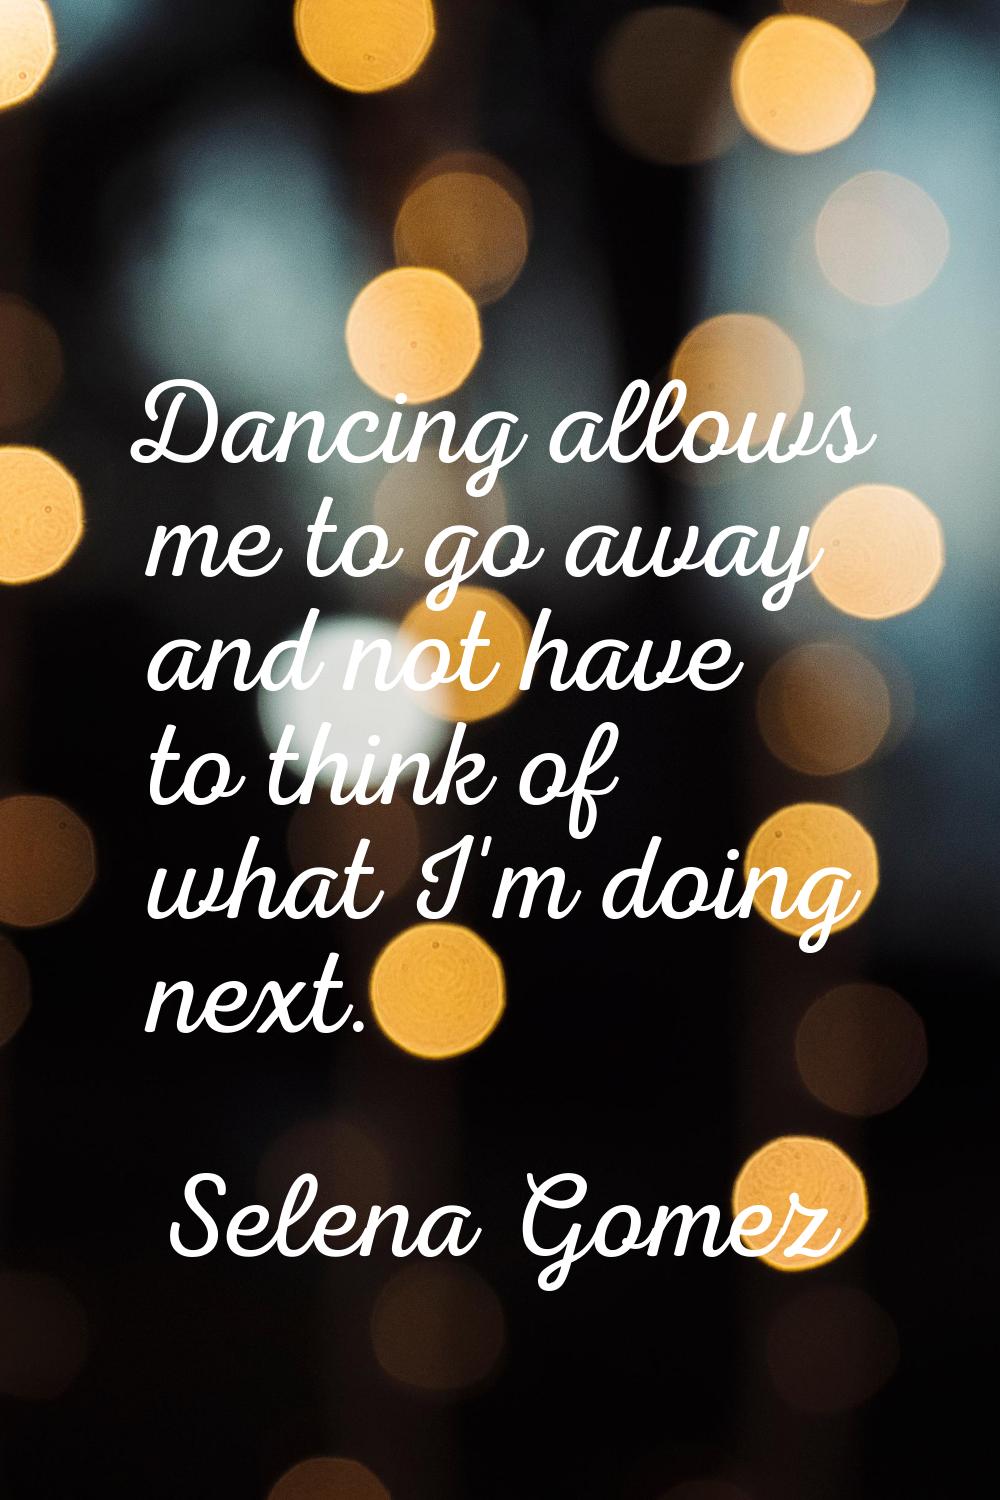 Dancing allows me to go away and not have to think of what I'm doing next.